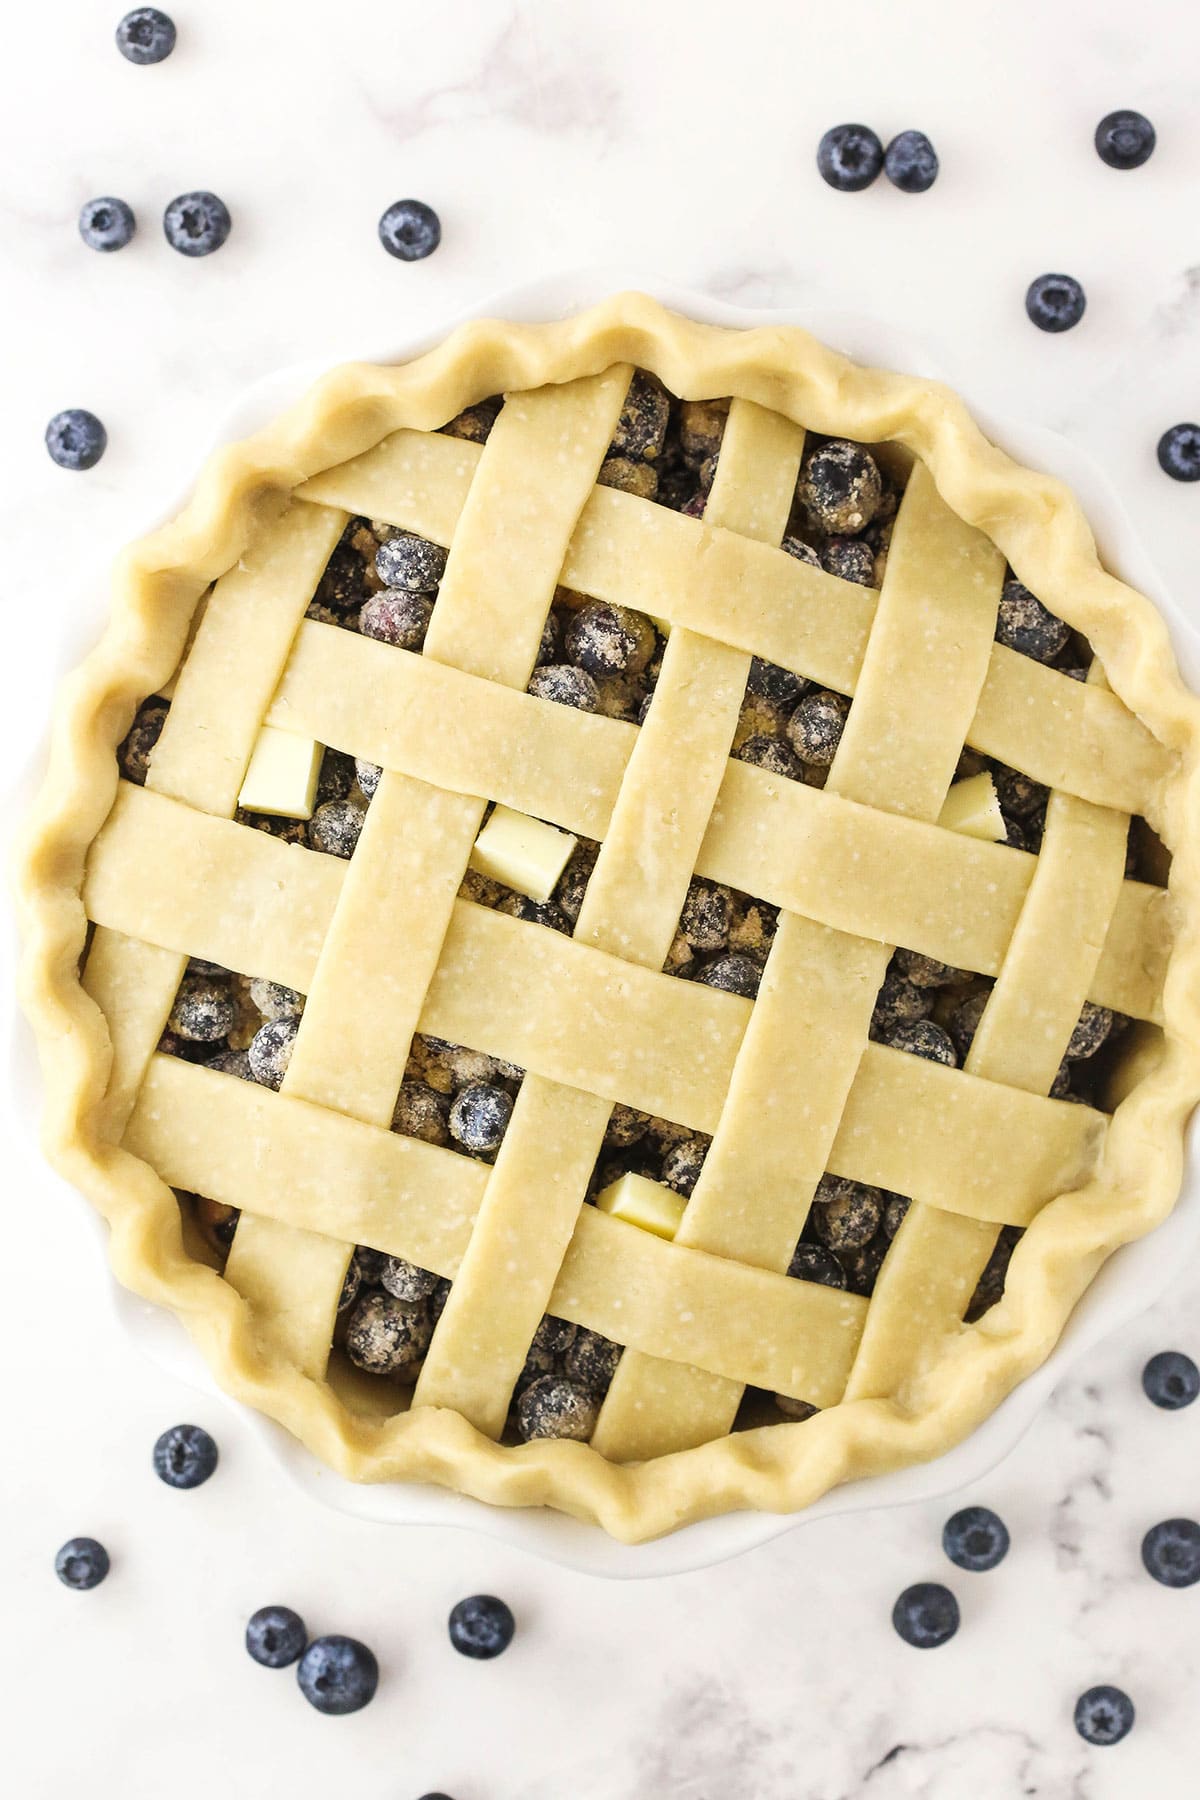 An assembled, unbaked blueberry pie on a marble countertop with blueberries scattered about